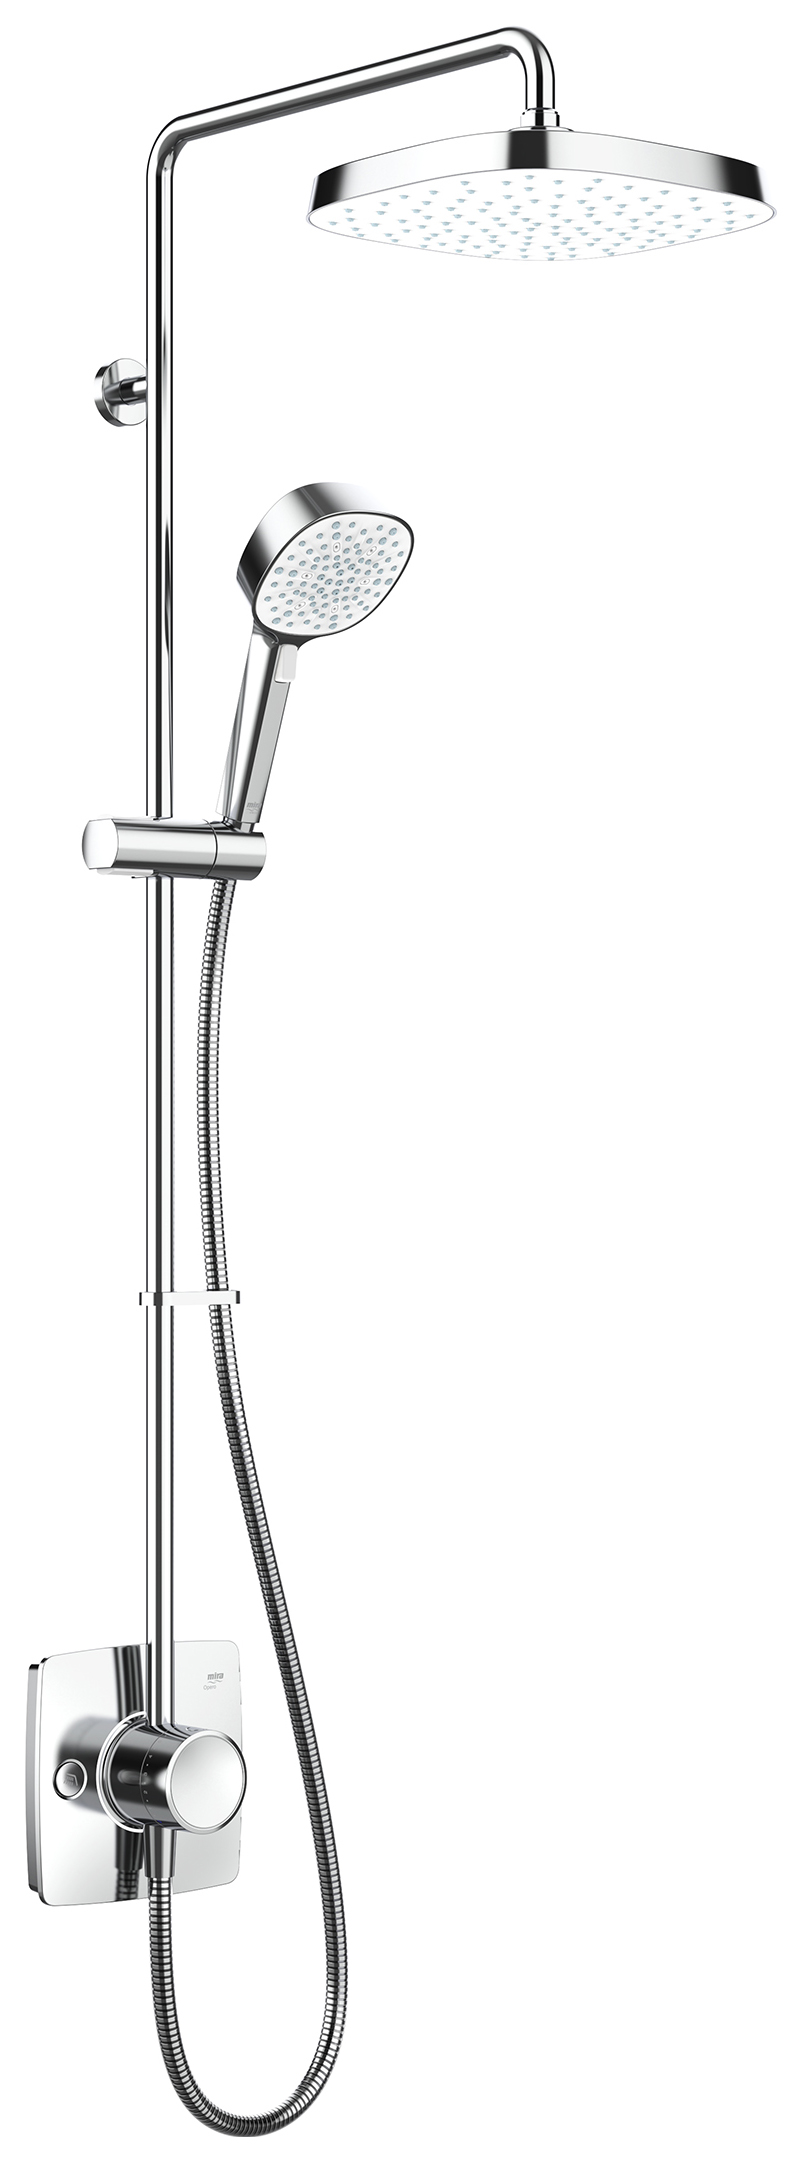 Mira Opero Dual Outlet Mixer Shower with HydroGlo